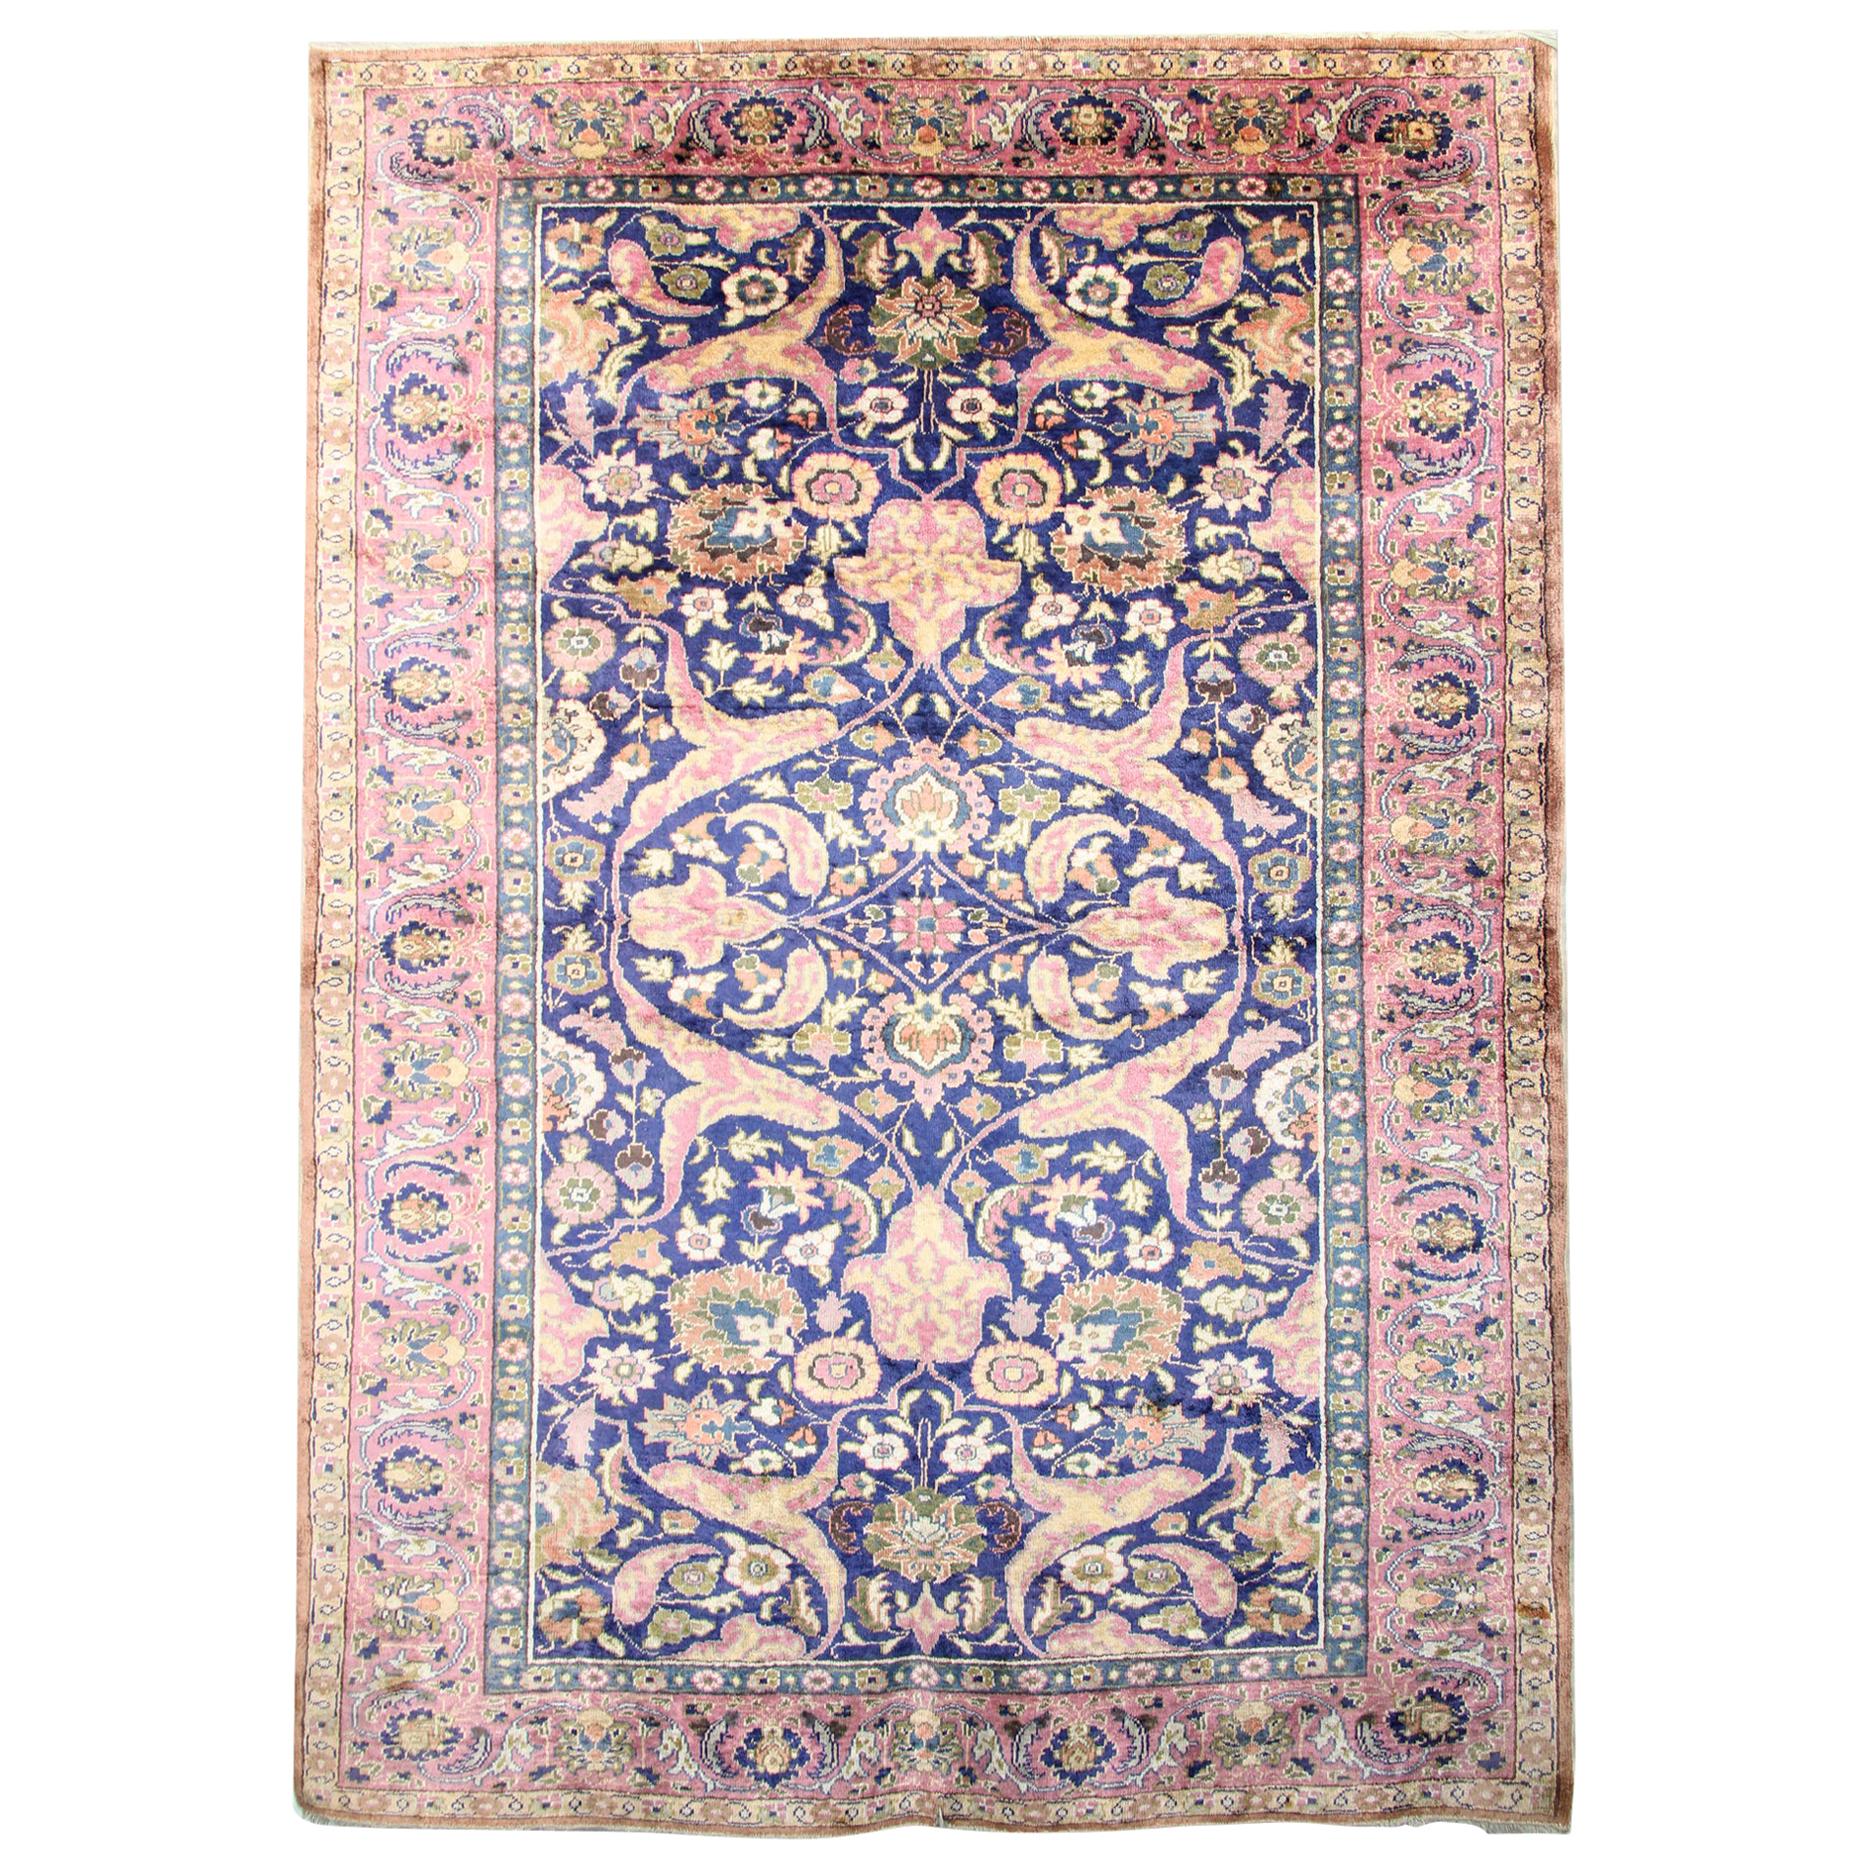 Antique Rugs Pure Silk Rugs, Turkish Rugs Oriental Handmade Carpet from Turkey For Sale